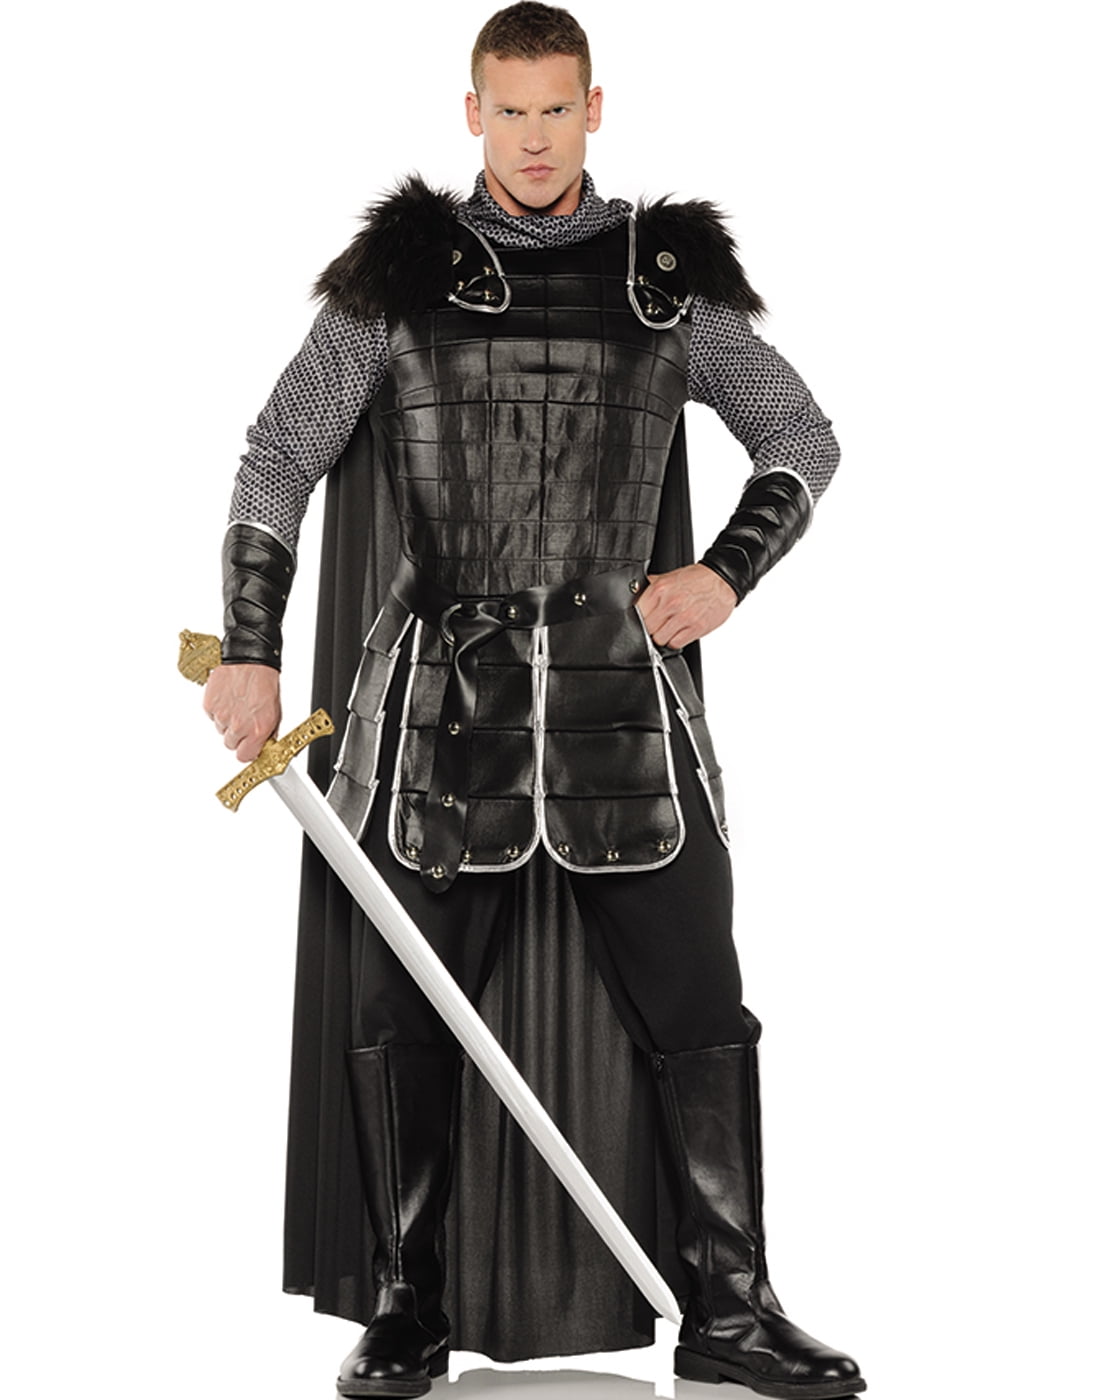 MENS MEDIEVAL MERCENARY COSTUME GHOST KNIGHT FANCY DRESS HALLOWEEN OUTFIT NEW 